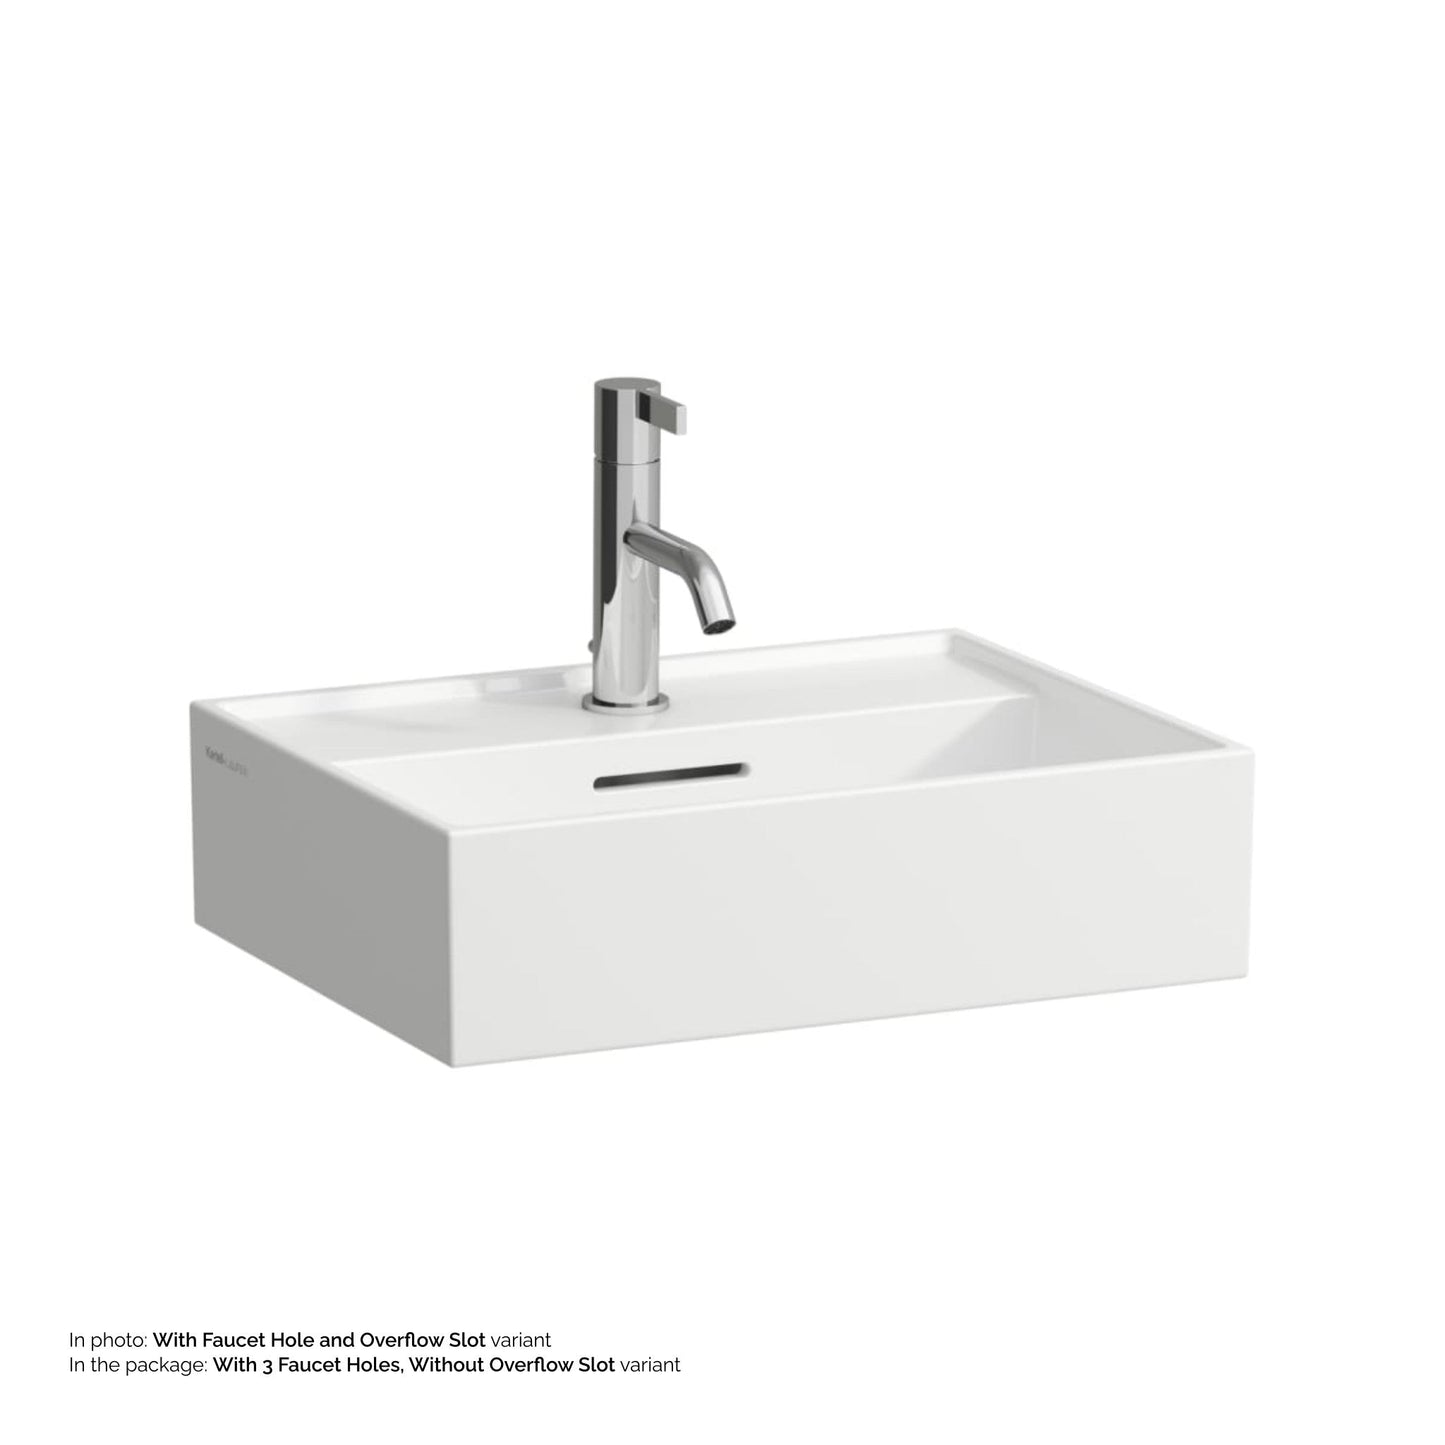 Laufen Kartell 18" x 13" White Countertop Bathroom Sink With 3 Faucet Holes